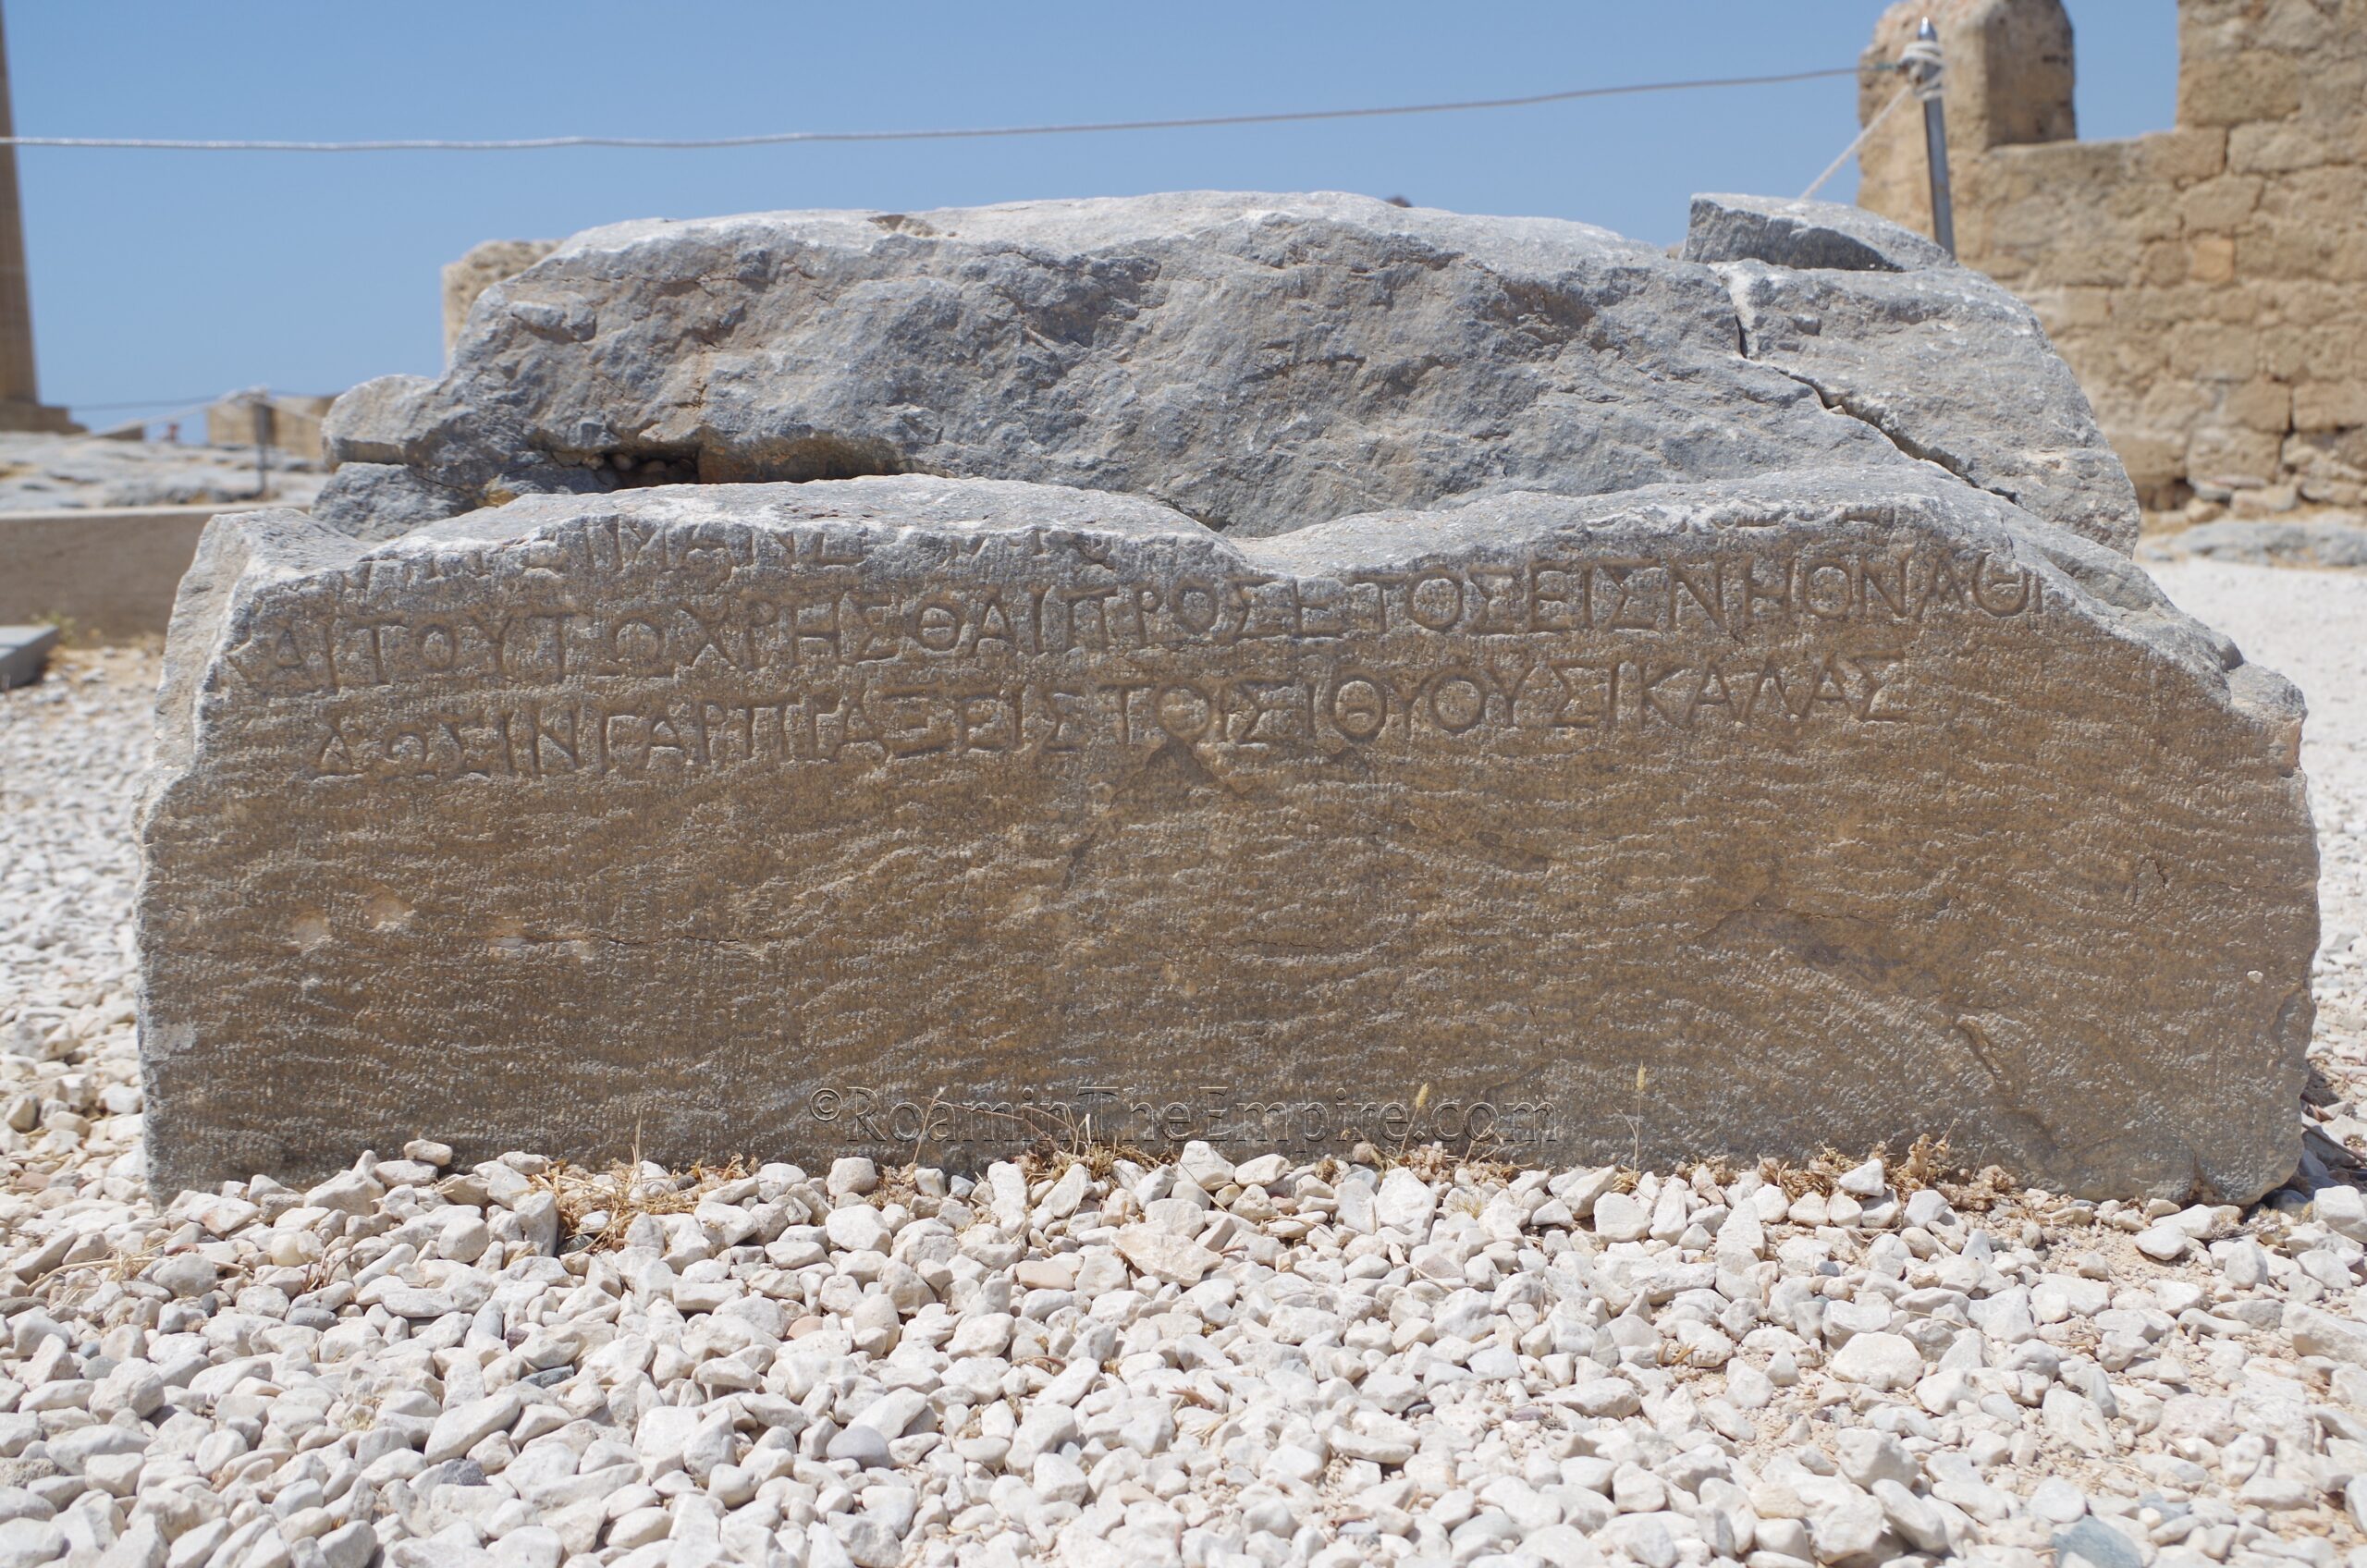 Inscription from the portico of Psithyros that indicates Seleukos built a temple in honor of Psithyros and suggesting offerings to Psithyros should not be less than a drachma. Dated to about 200 CE.